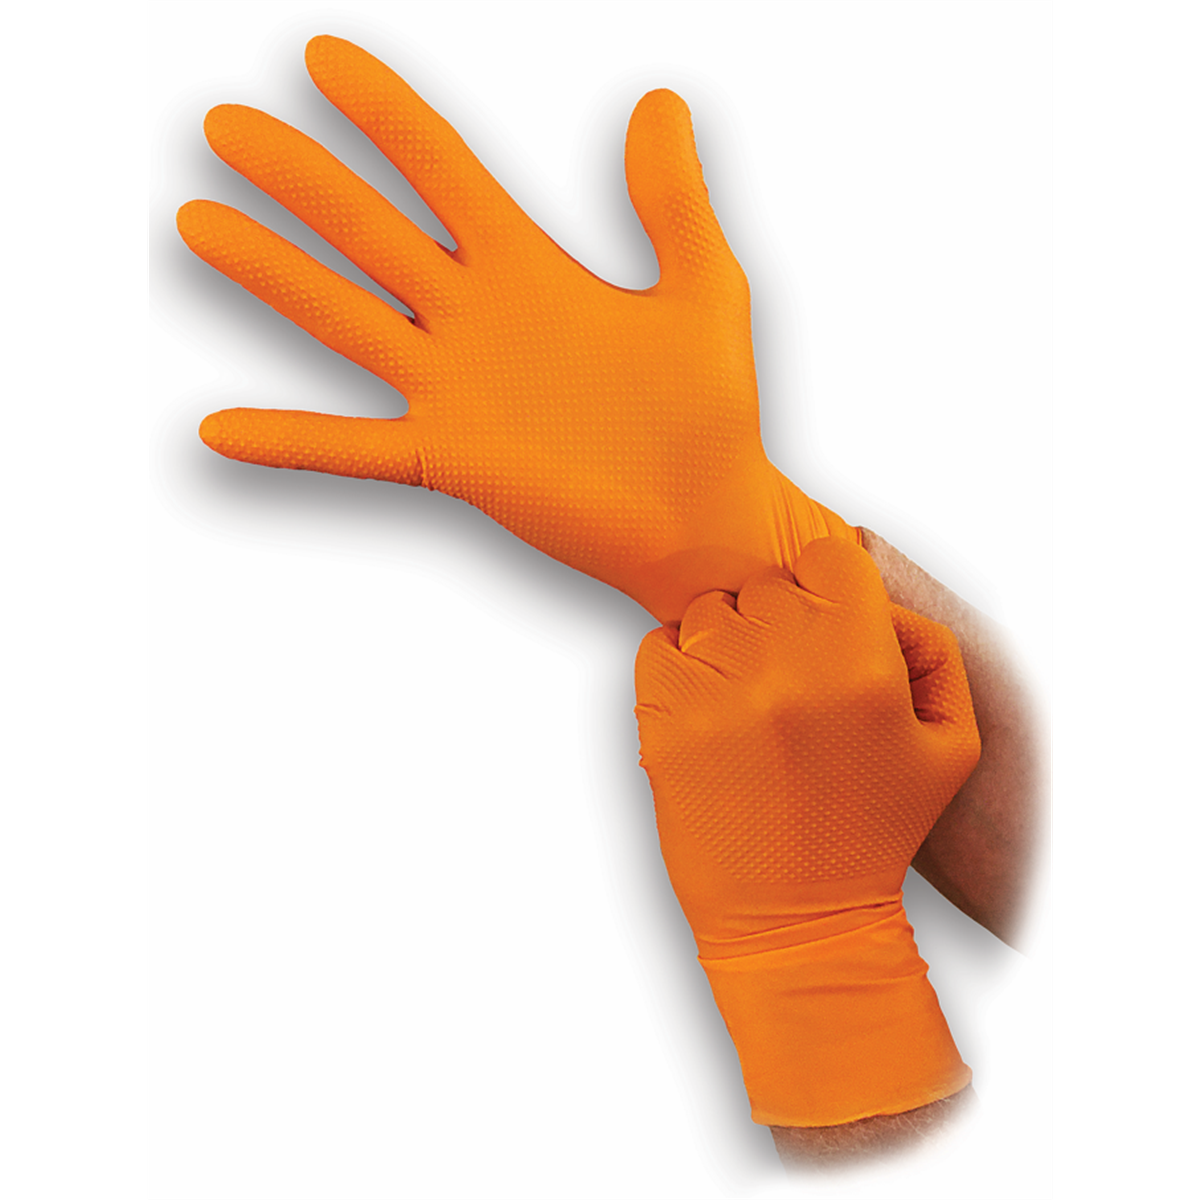 Picture of Atlantic Safety Products BLGOO-M Super Tough 8 Mil Powder Free Nitrile Disposable Gloves with Aggressive Diamond Grip, Orange - Medium - 100 per Box